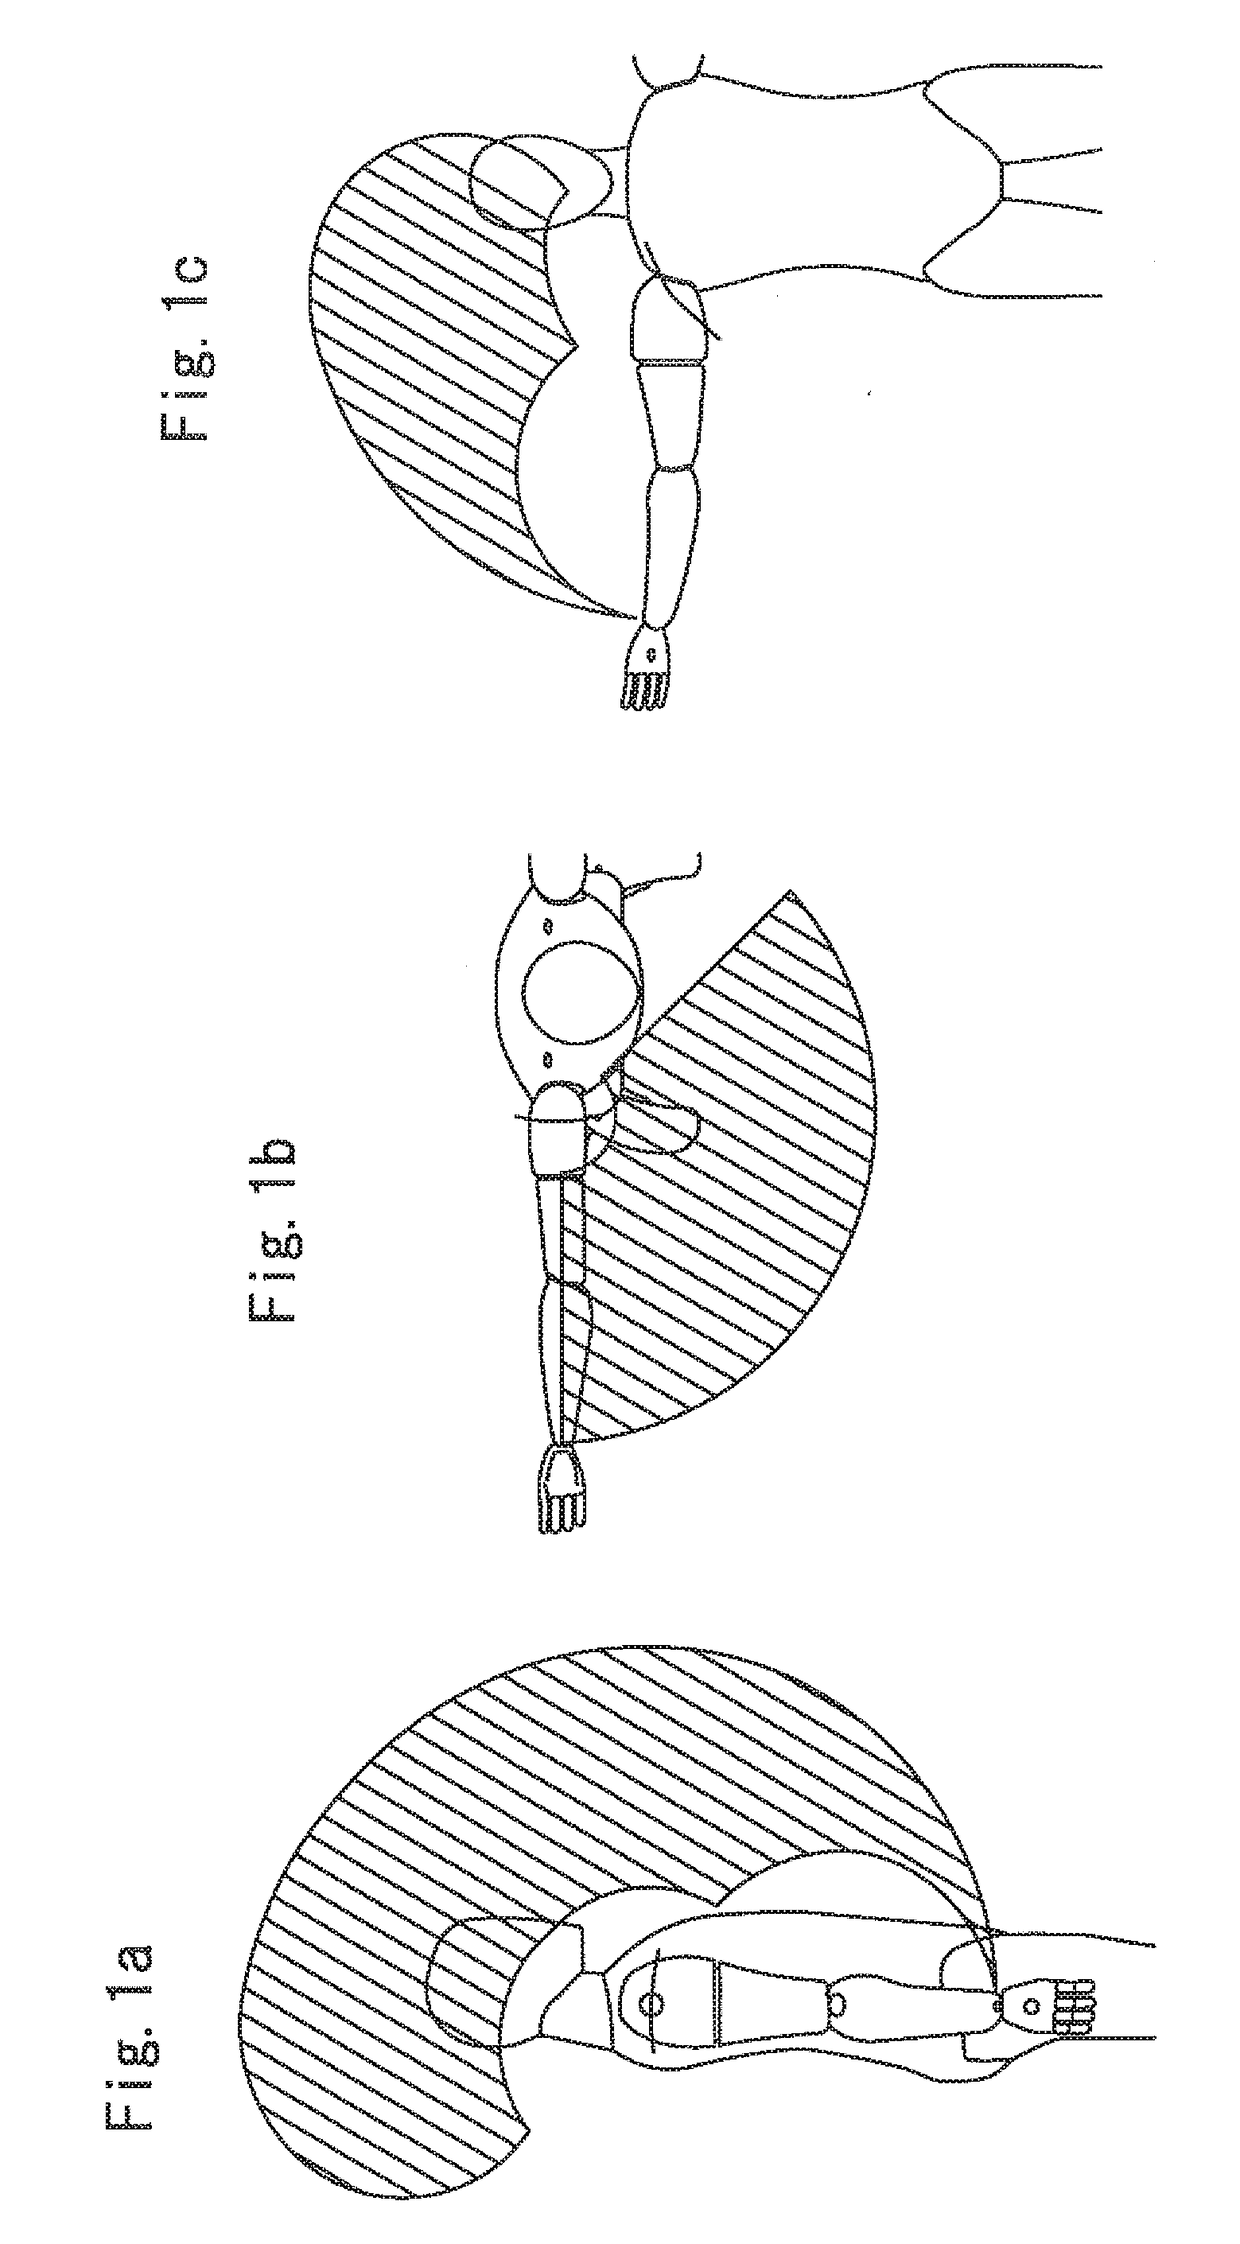 Wearing-type movement assistance device